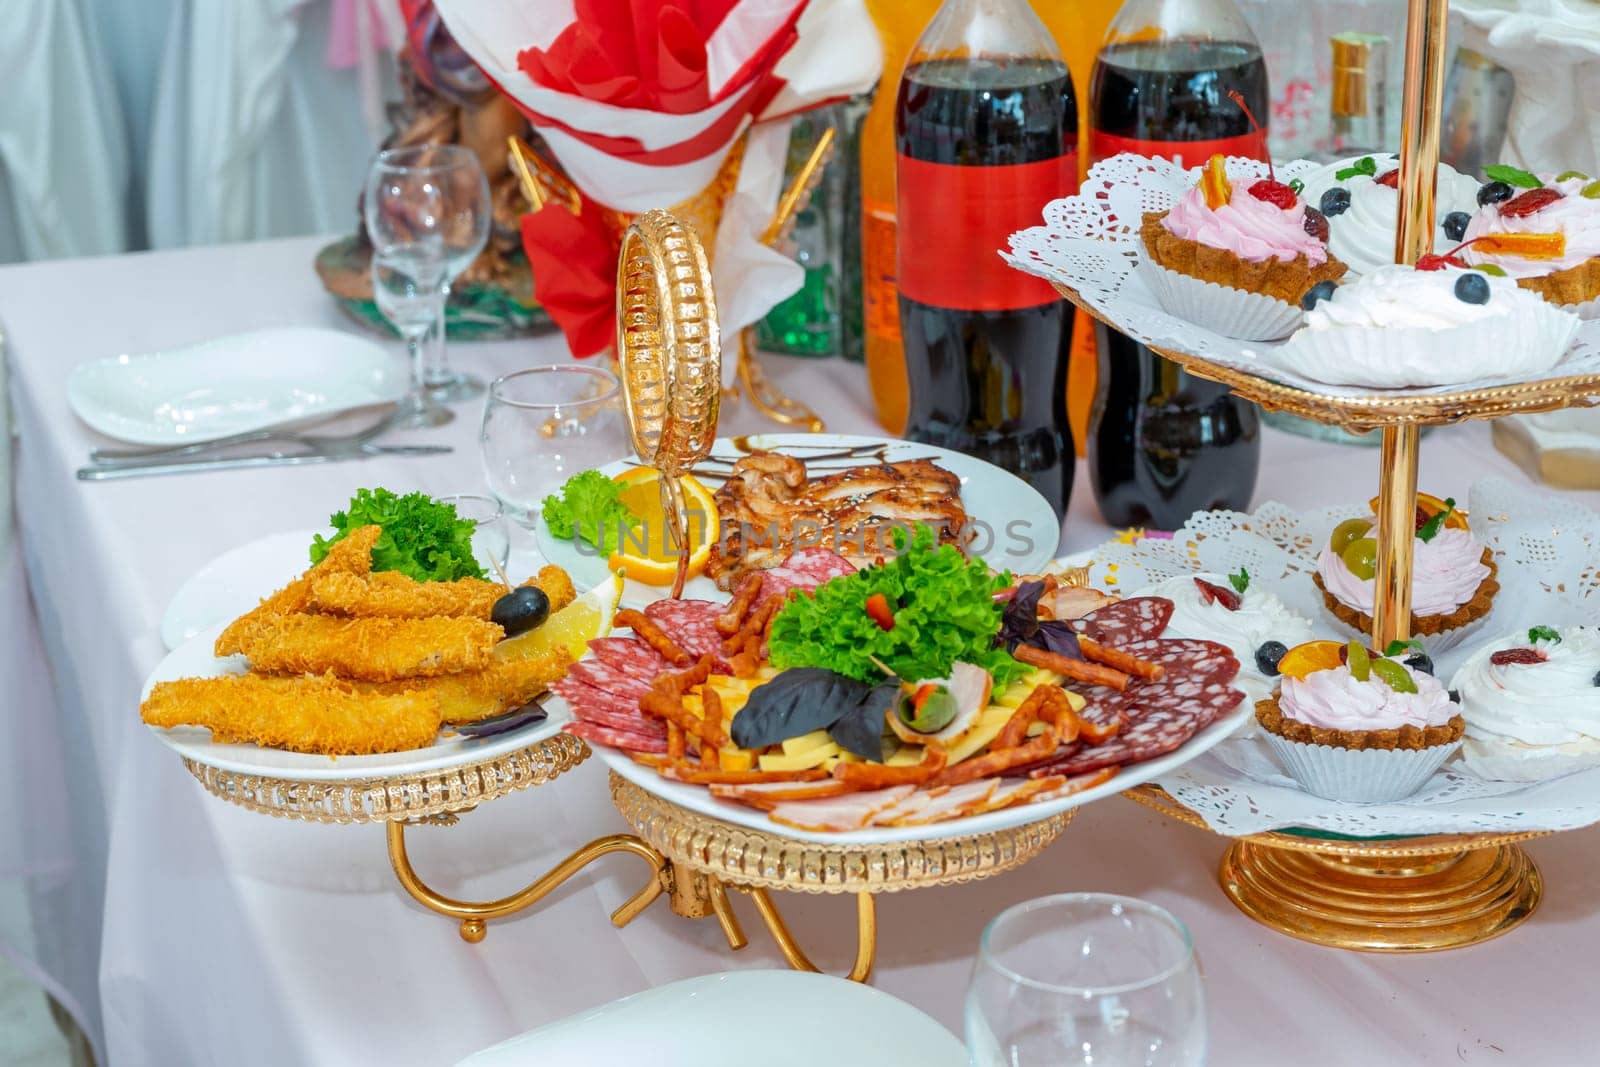 The banquet table is served with meat and fish products by Serhii_Voroshchuk